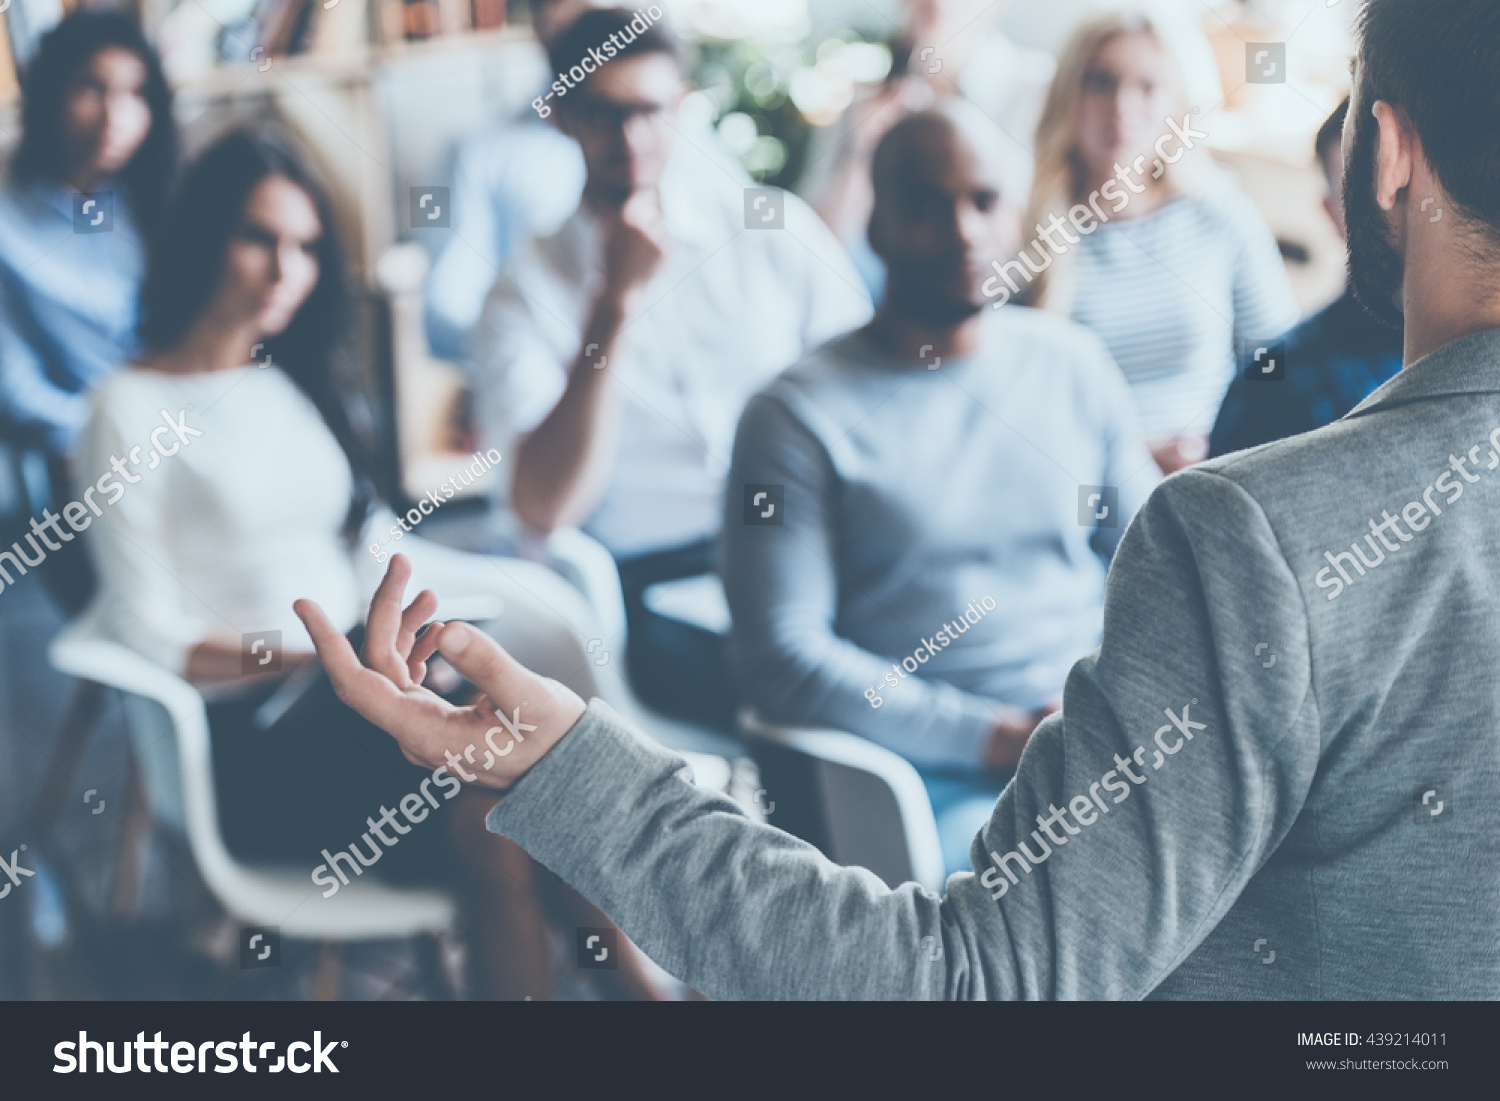 Business coach. Rear view of man gesturing with hand while standing against defocused group of people sitting at the chairs in front of him  #439214011